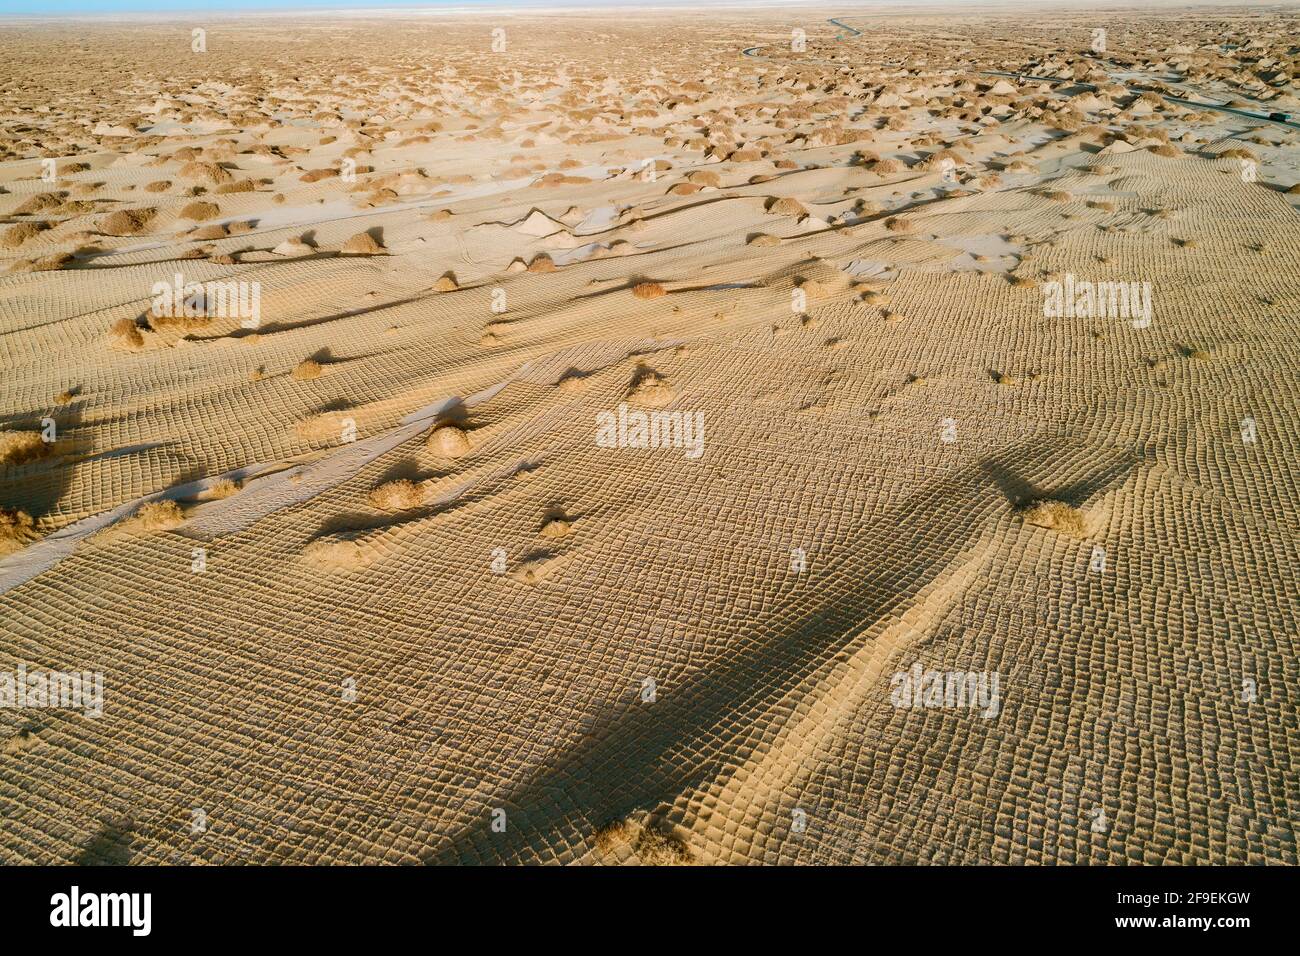 Aerial photography of desert sand fixation Stock Photo